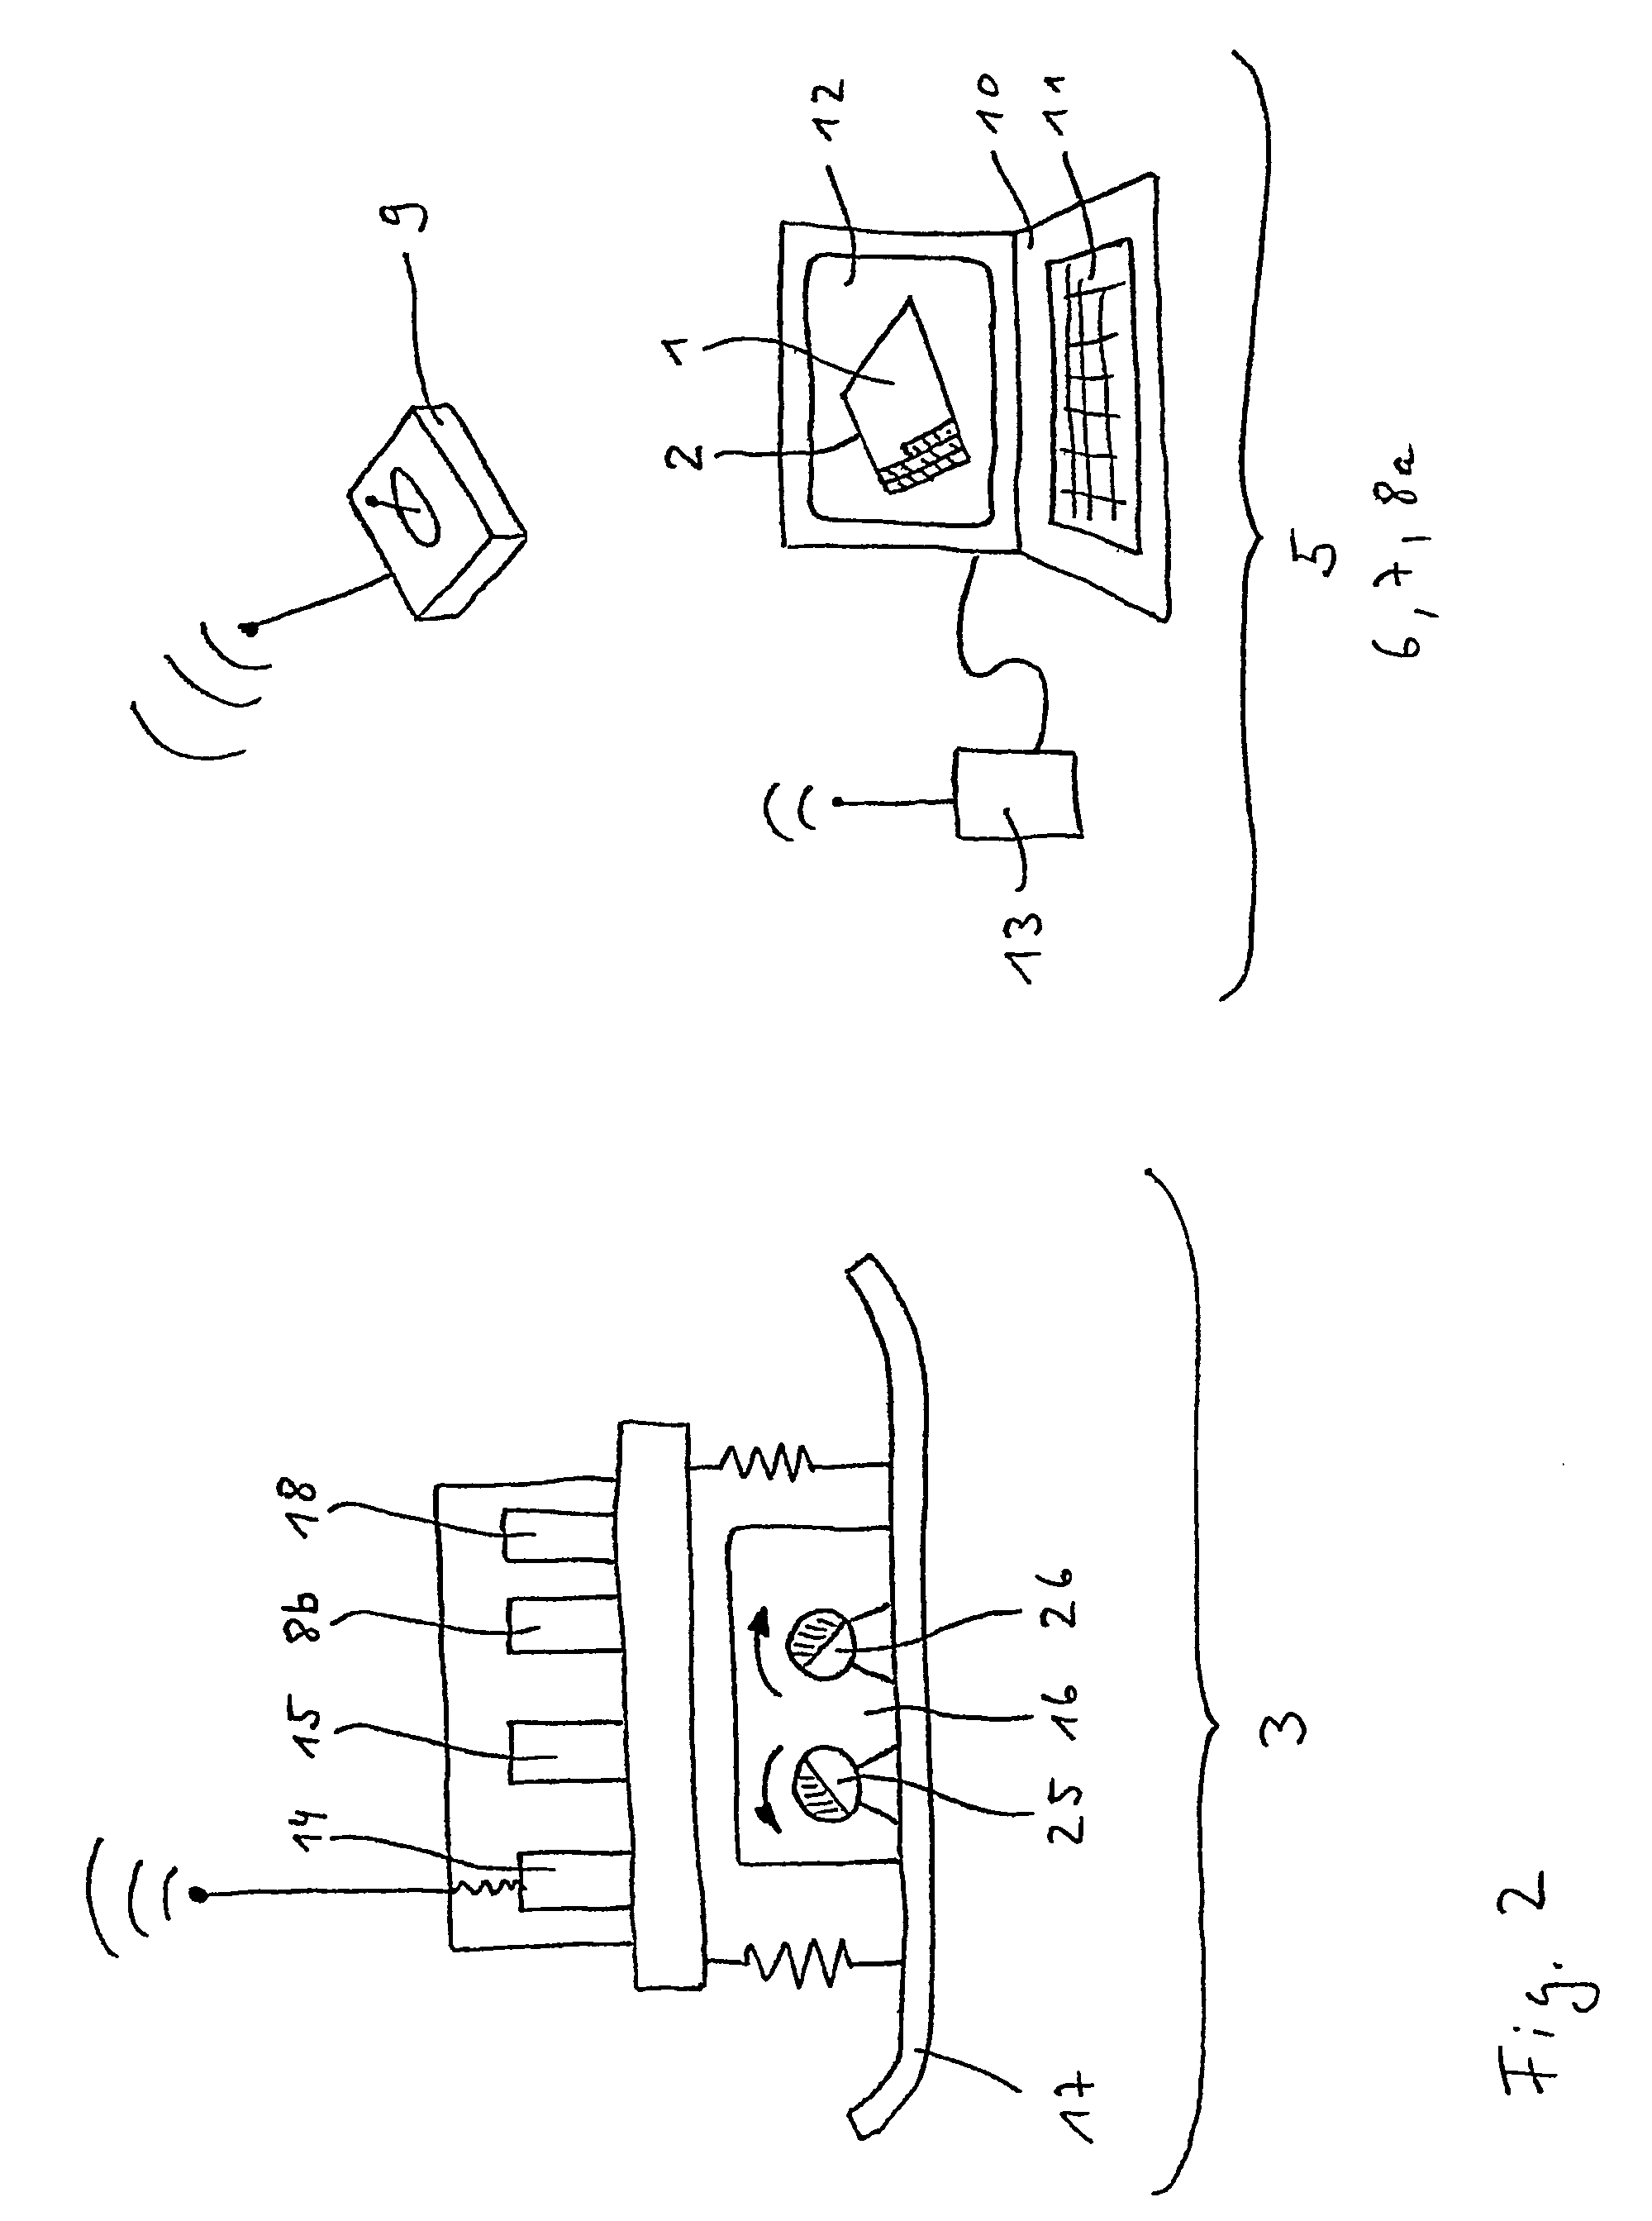 System and method of the automatic compaction of soil